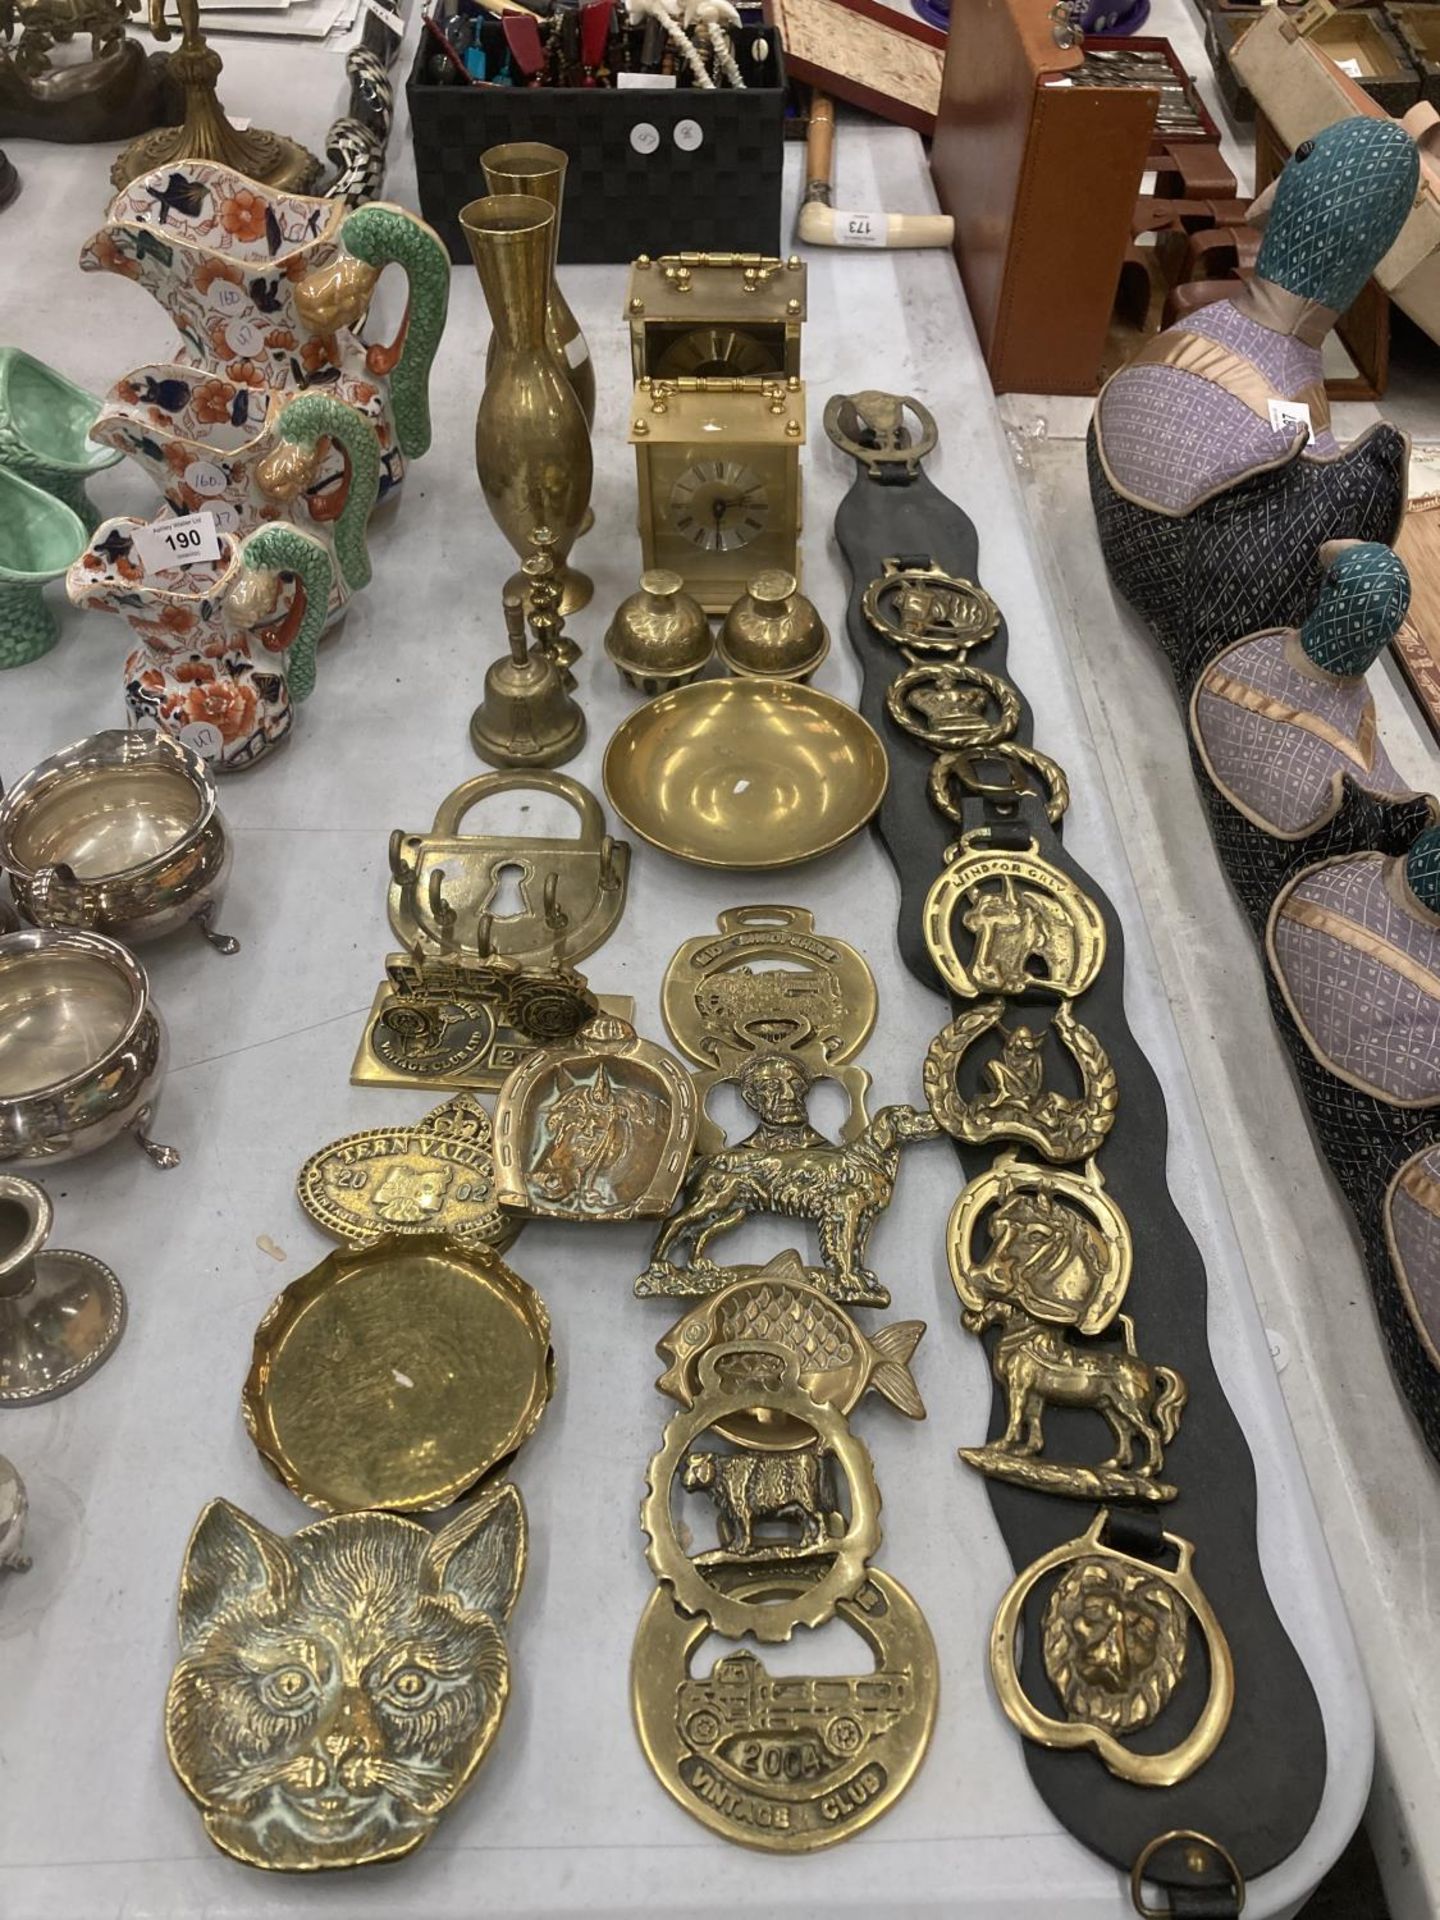 A LARGE QUANTITY OF BRASSWARE TO INCLUDE HORSE BRASSES, MARTINGALES, CARRIAGE CLOCKS, BELLS,